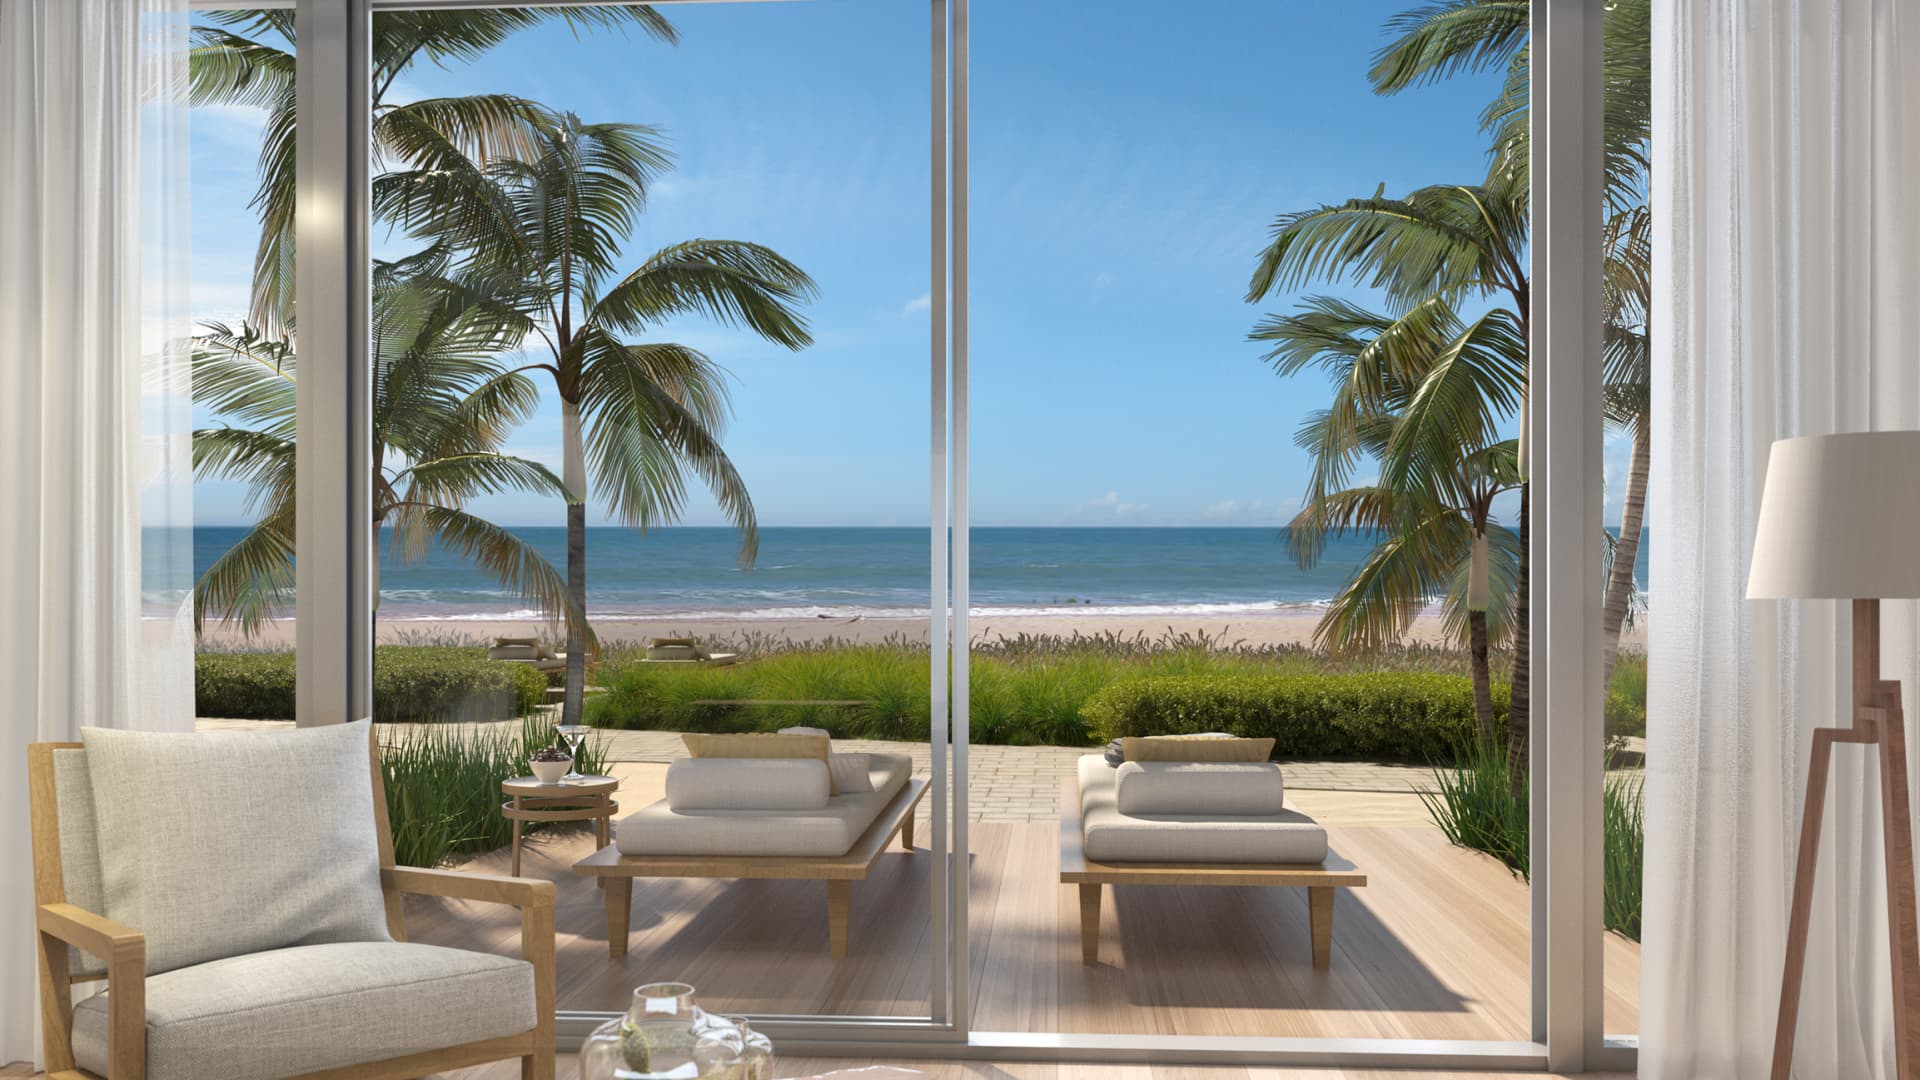 A rendering of one of the Turnberry Ocean Club Residences' beach front cabanas. The 250 sq ft structure is priced at $1.2 million.